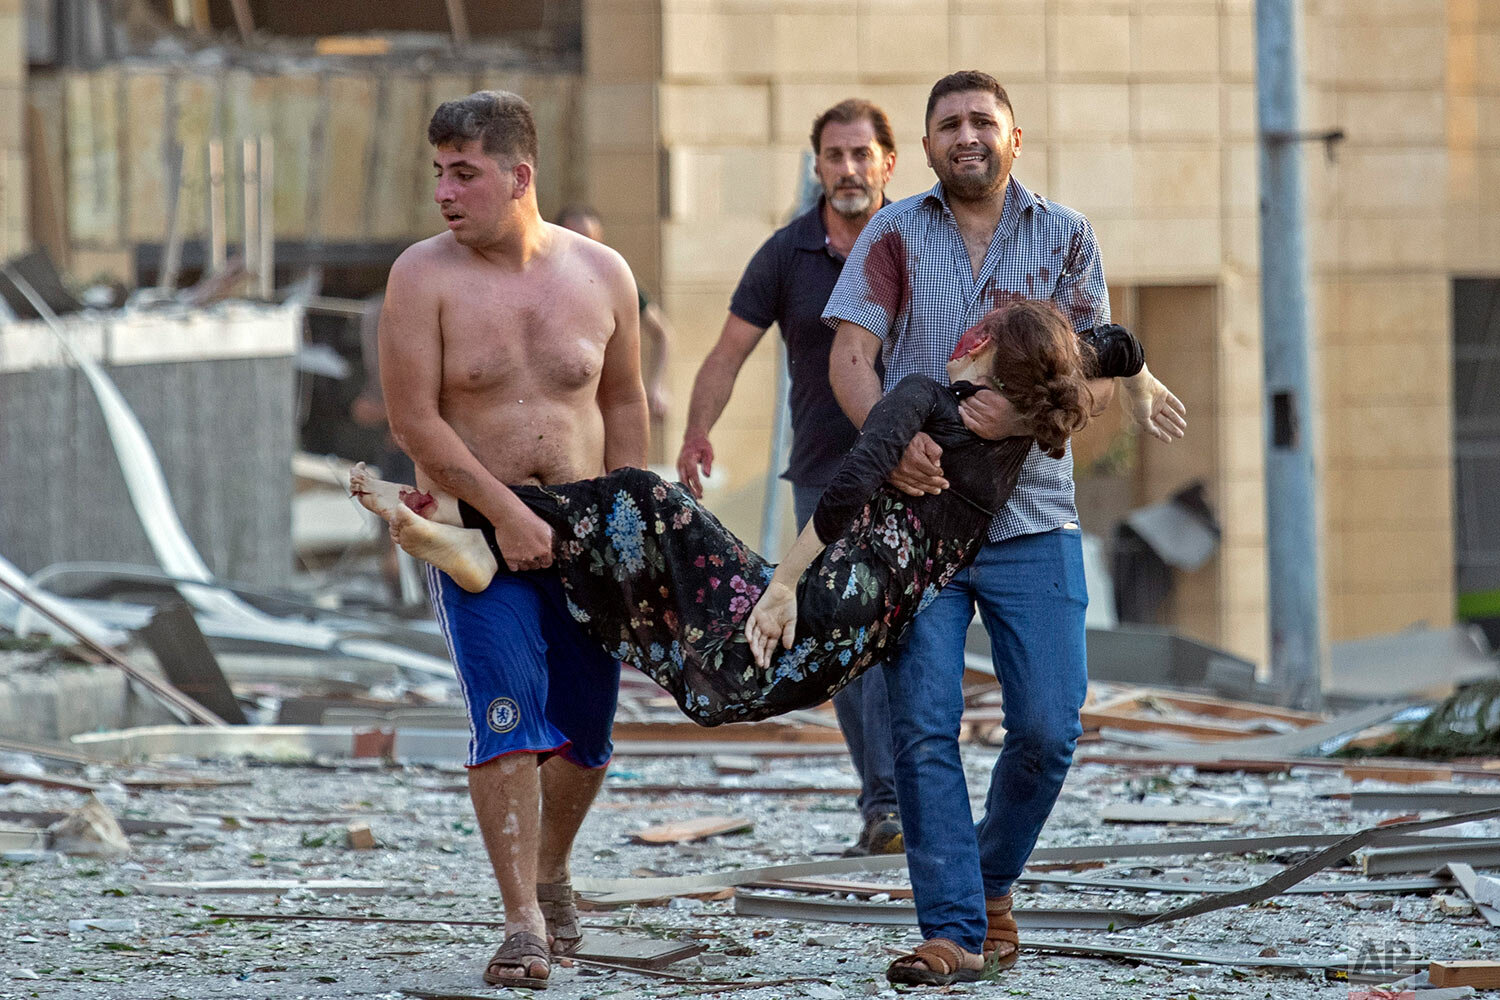  A wounded woman is evacuated after a massive explosion in Beirut, Lebanon, Tuesday, Aug. 4, 2020. (AP Photo/Hassan Ammar) 